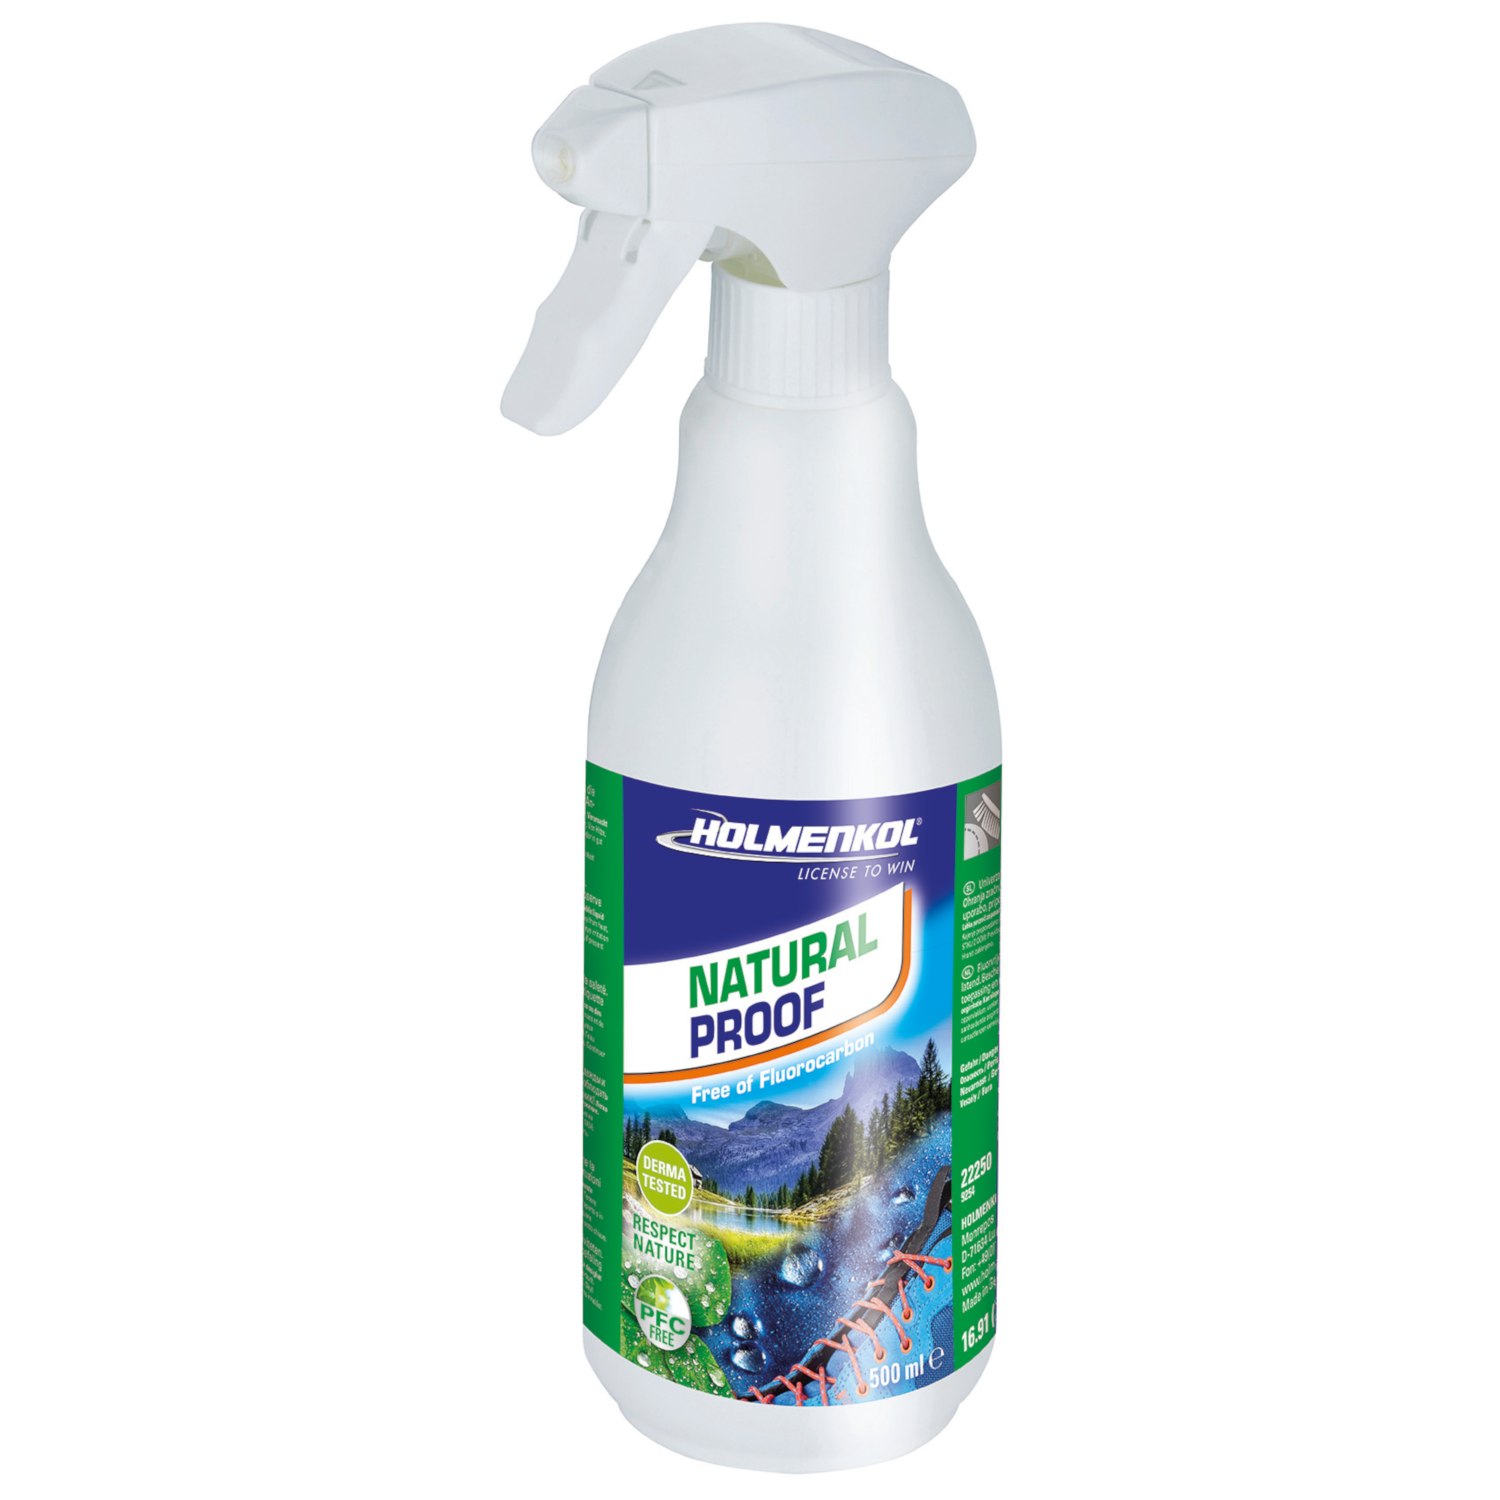 Productfoto van Holmenkol Natural Proof - Impregnation for Functional Wear - 500ml